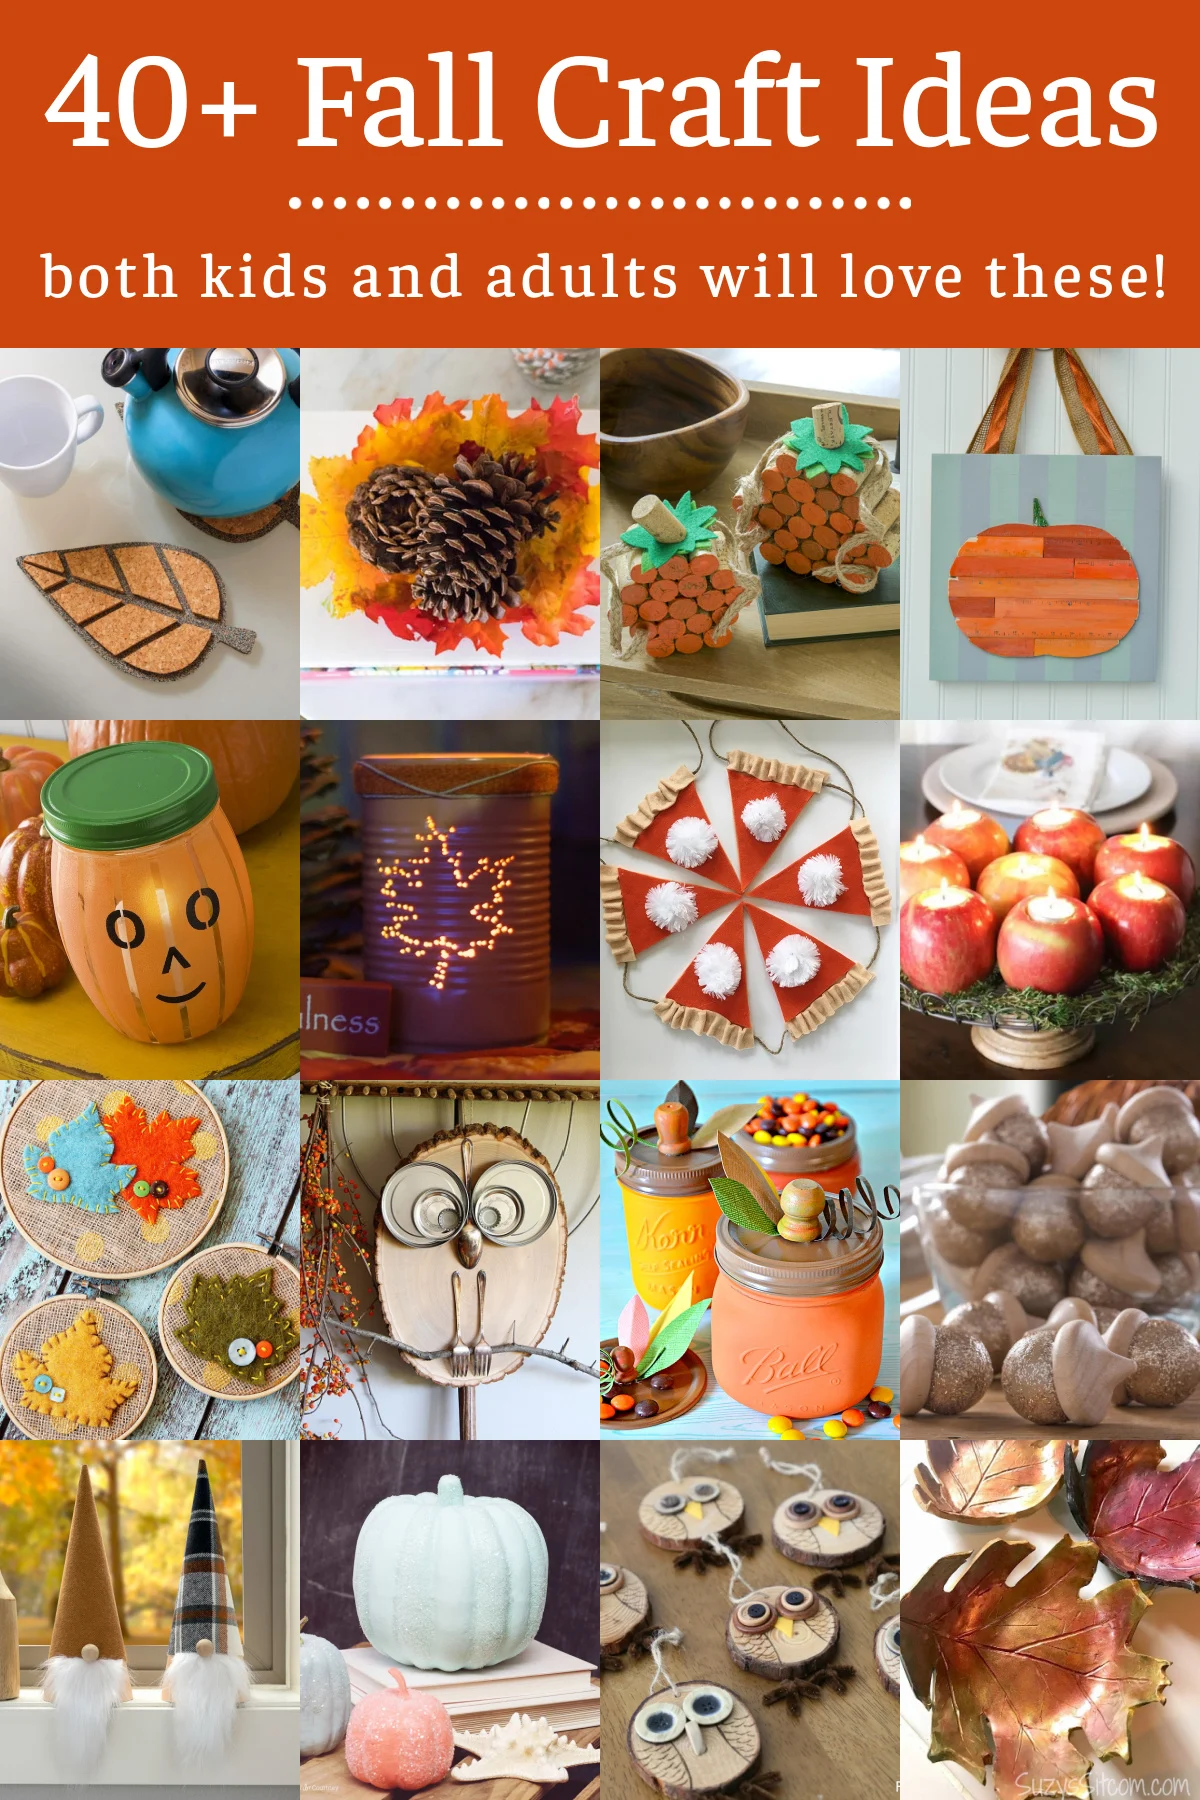 Fabulous Fall Crafts for Teens - Big Family Blessings